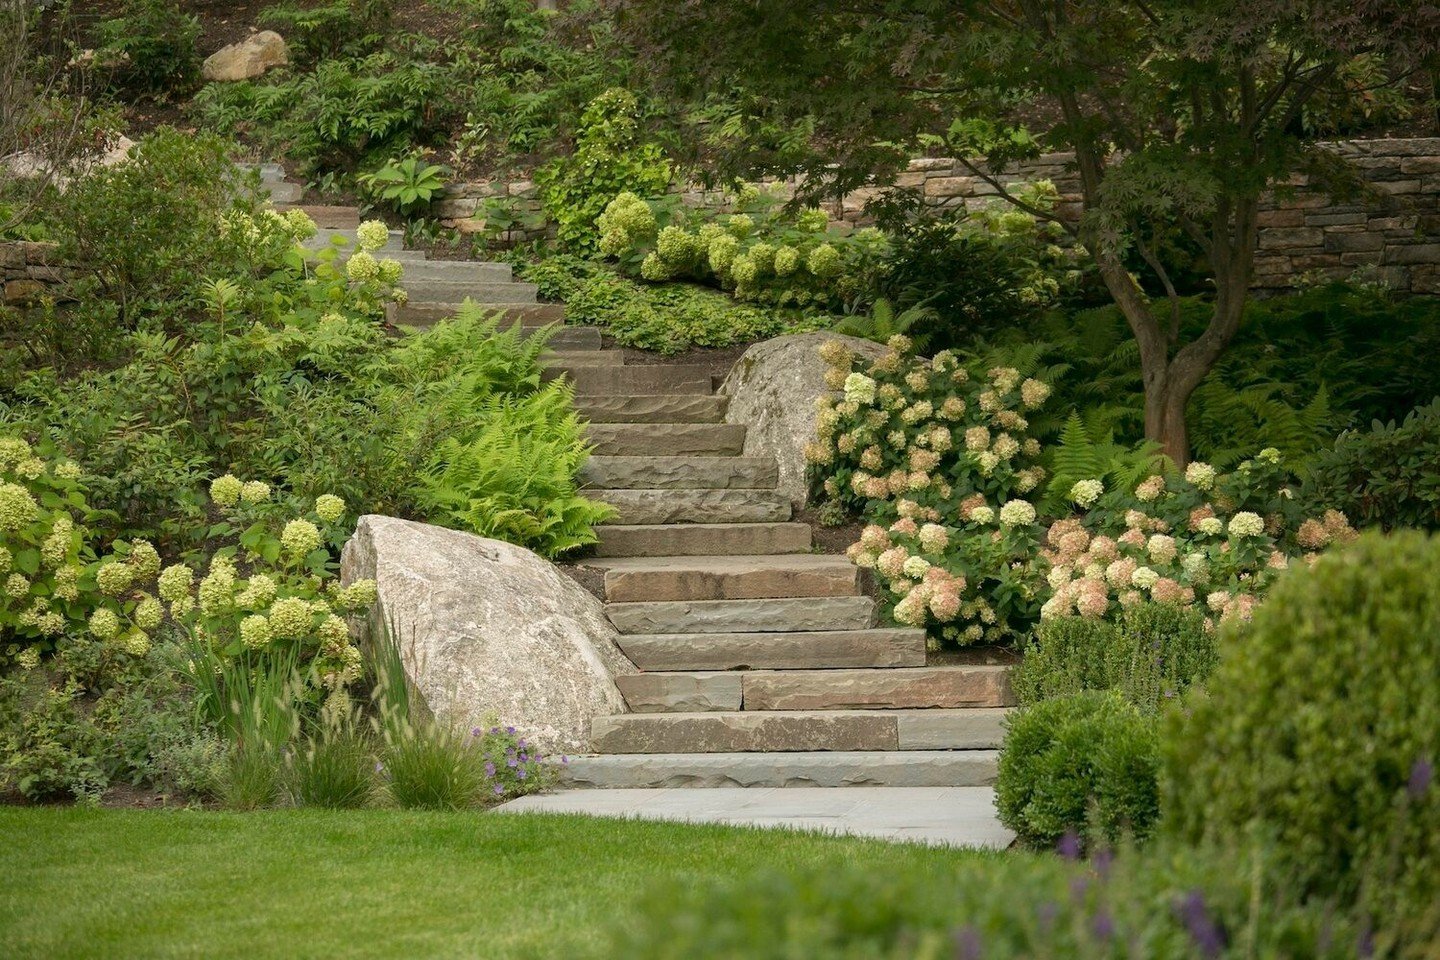 From these stone steps to the view from where they're laid (swipe to see), this Greater Boston backyard offers everything for outdoor living this season. ⁠
⁠
Visit the link in our bio for every detail of this space, ready for all kinds of gathering a